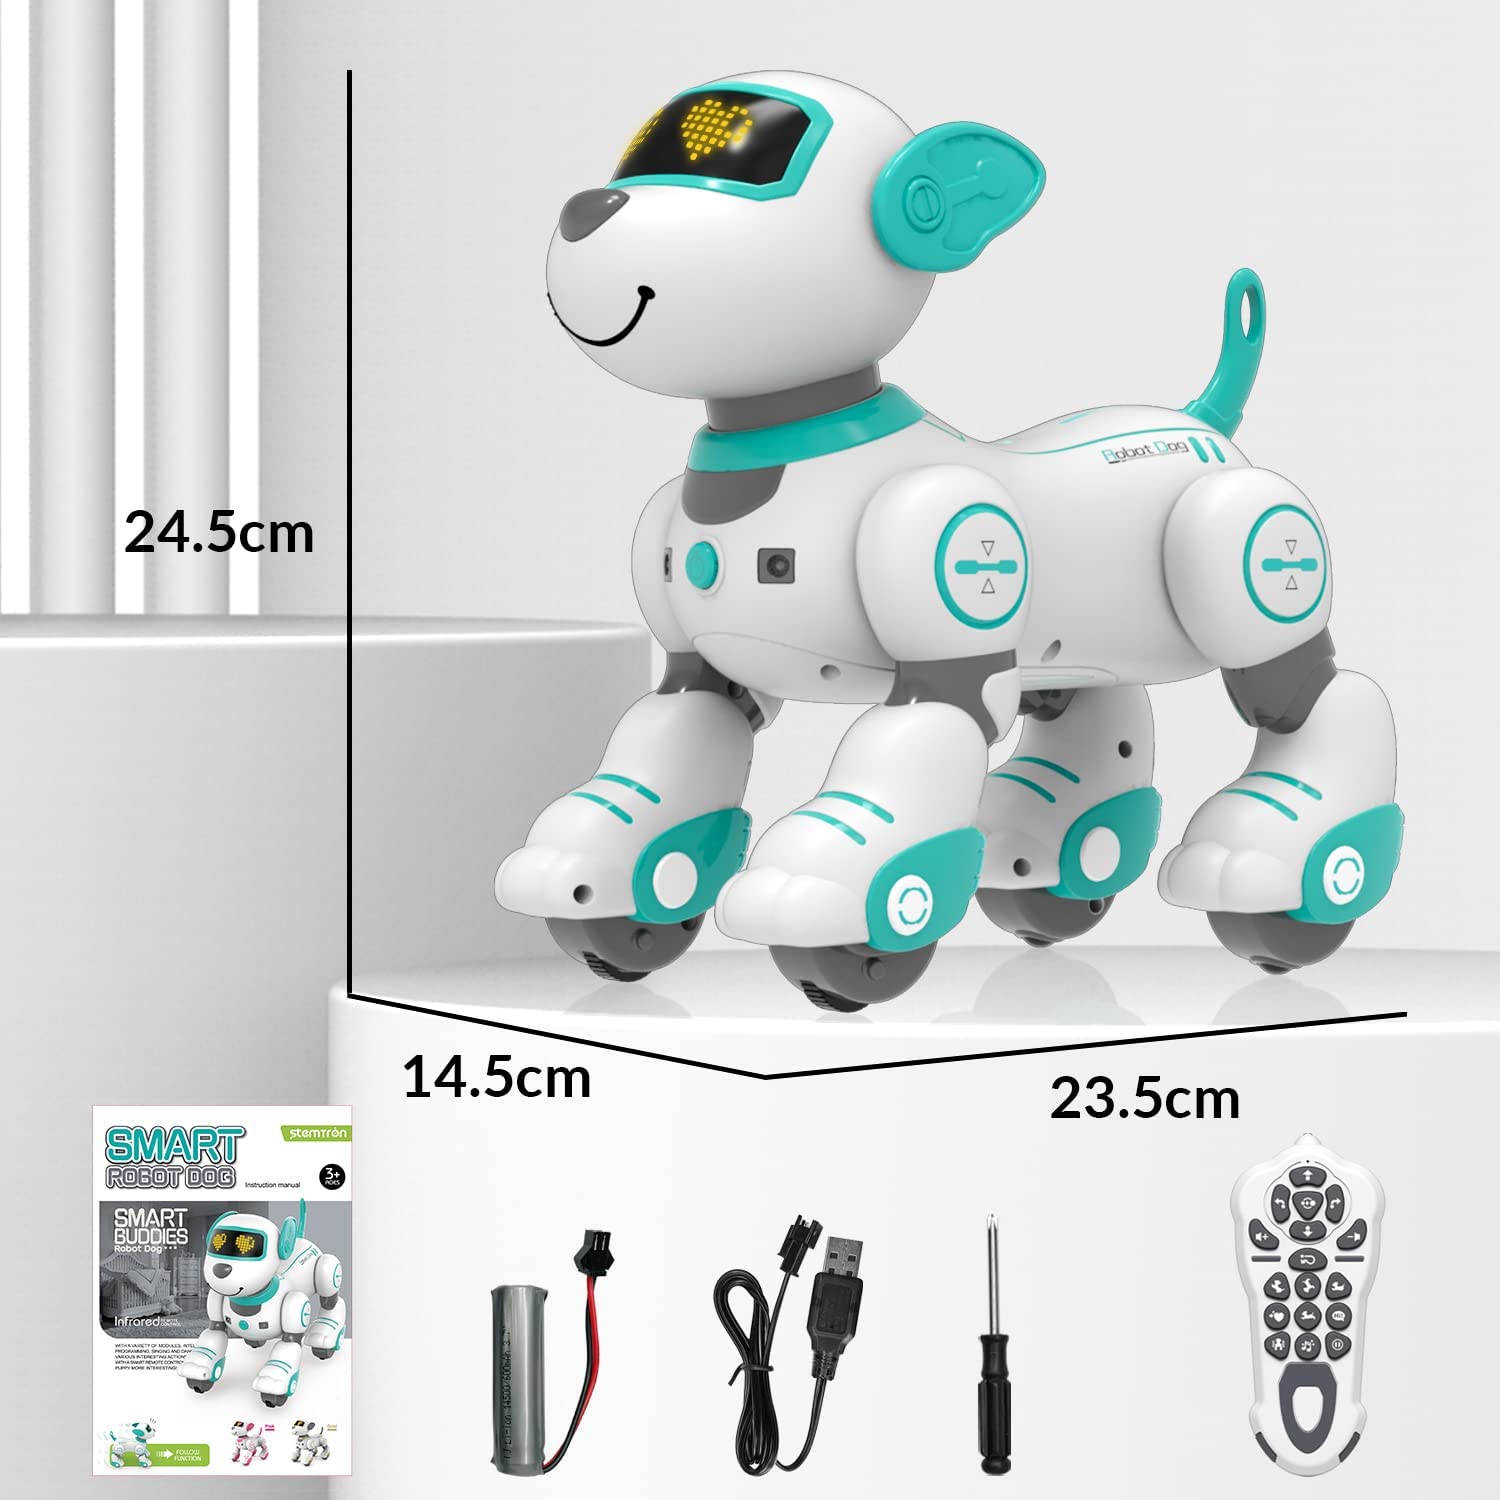 VATOS Remote Control Robot Dog Toy for Kids Interactive Touch